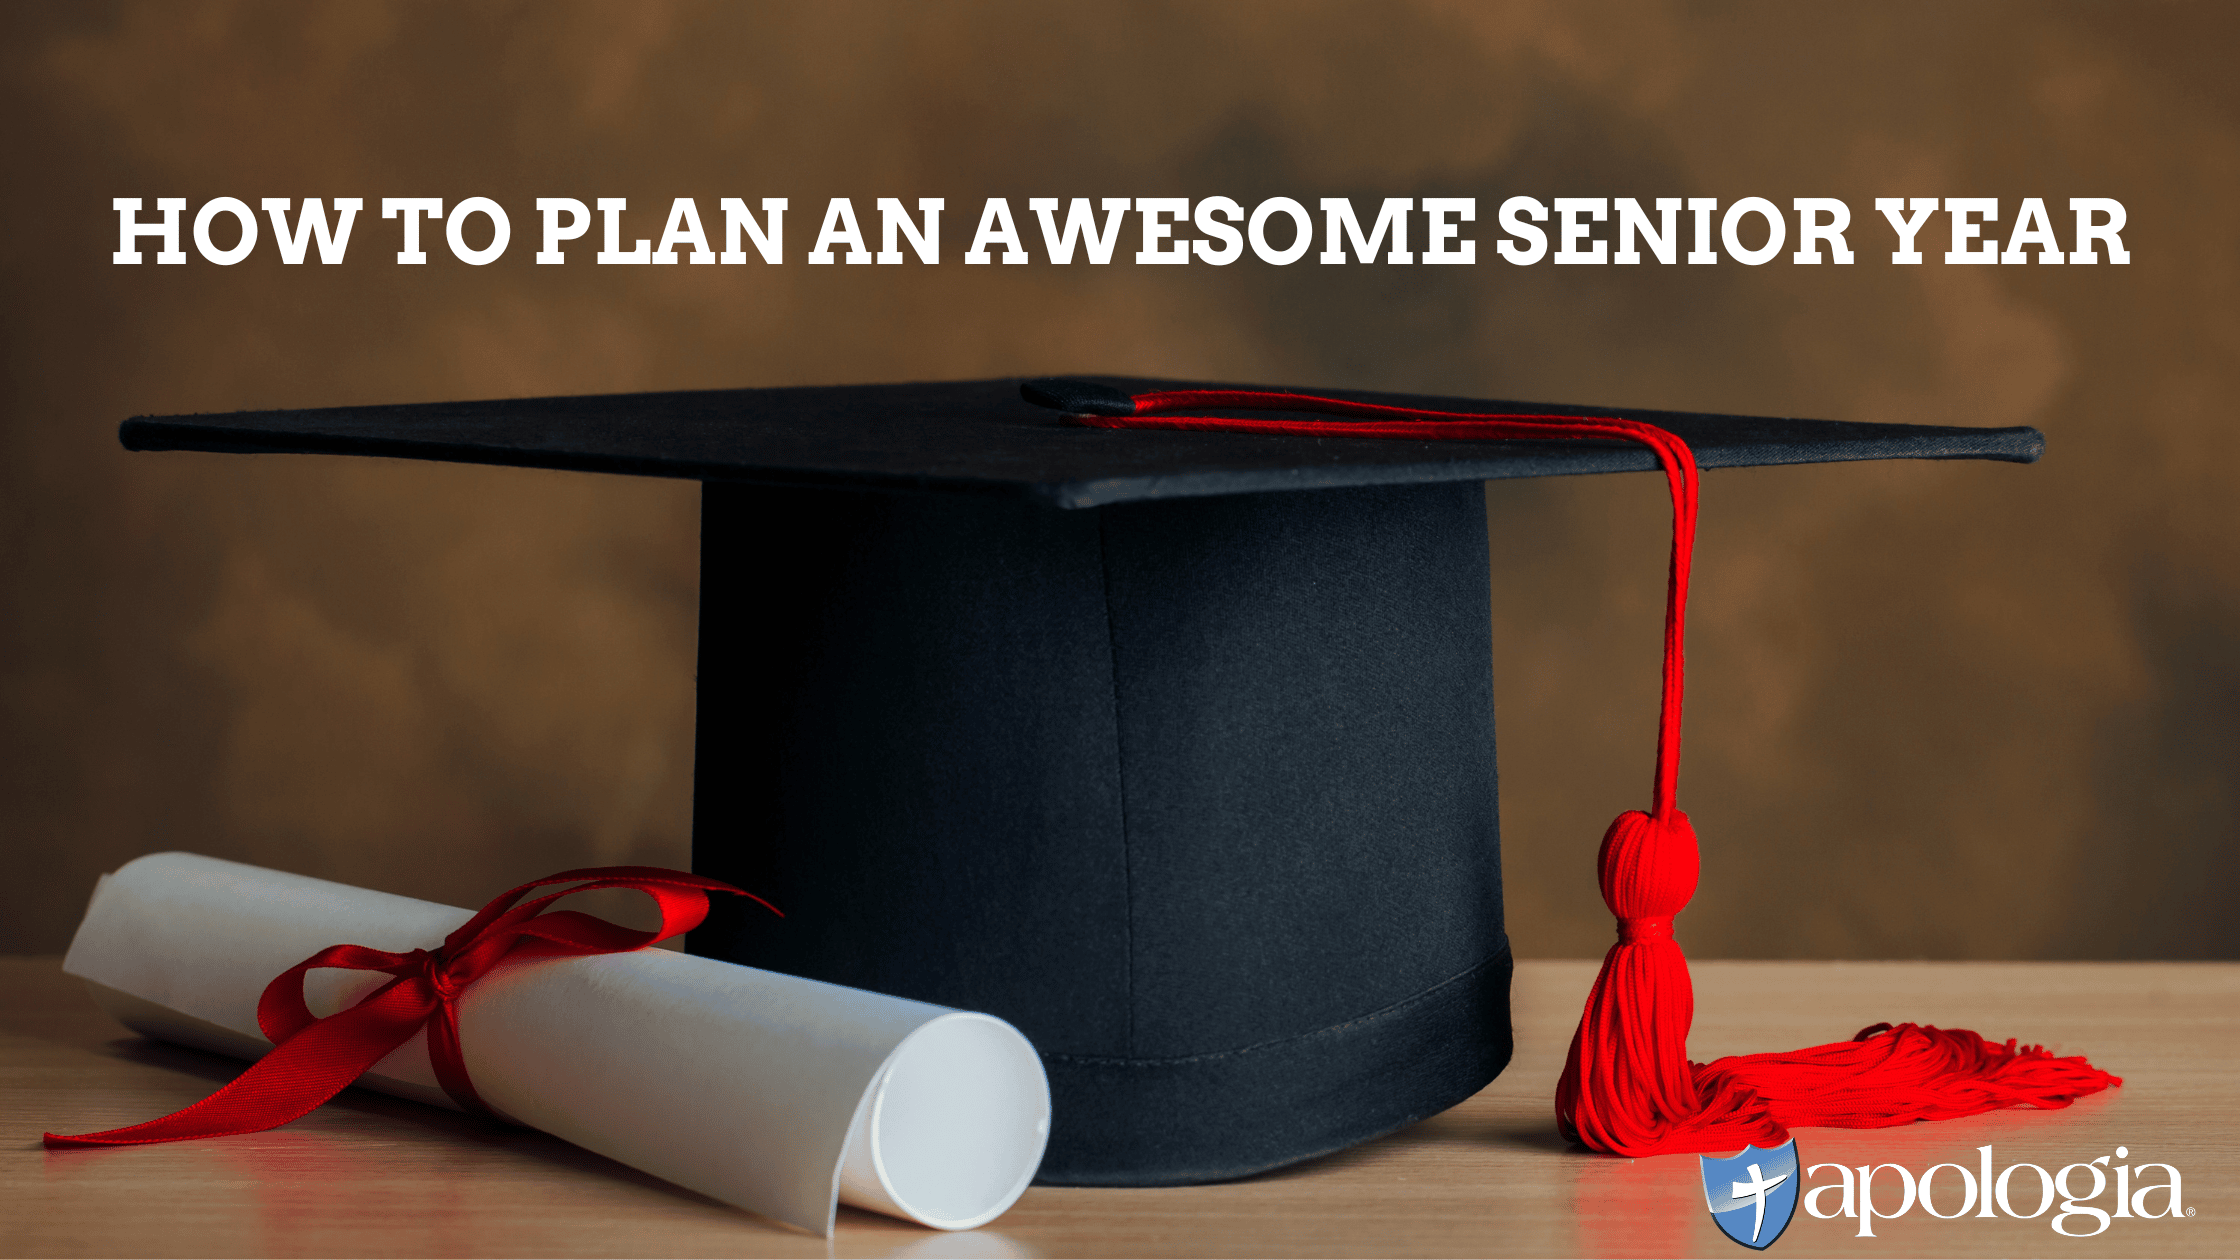 How to Plan an Awesome Senior Year